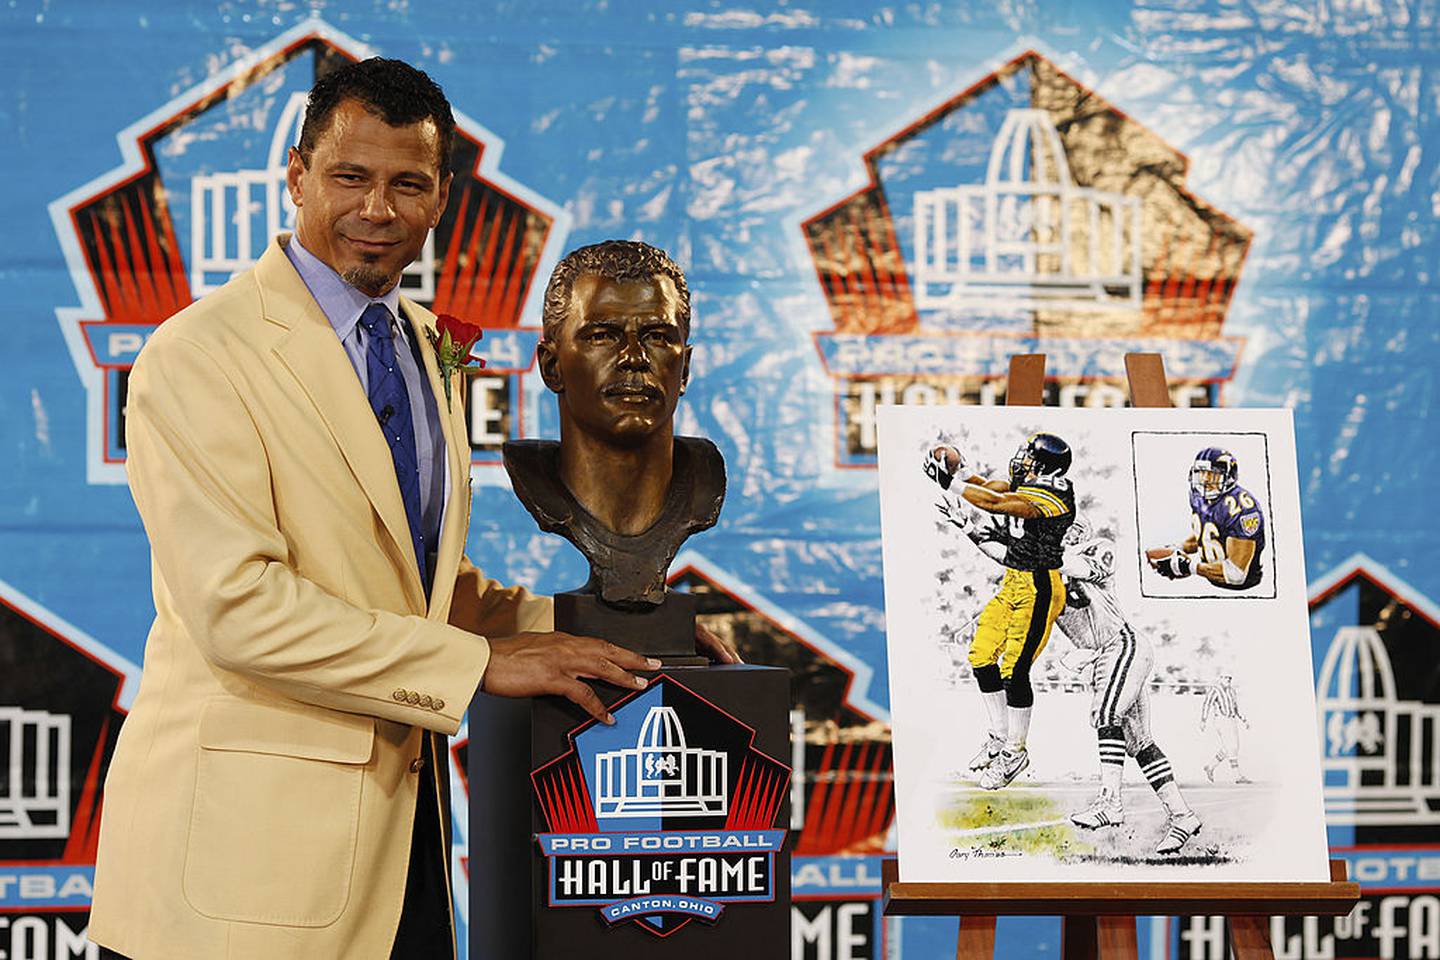 CANTON, OH - AUGUST 8: Rod Woodson poses with his bust at his induction into the Pro Football Hall of Fame during the 2009 enshrinement ceremony at Fawcett Stadium on August 8, 2009 in Canton, Ohio.